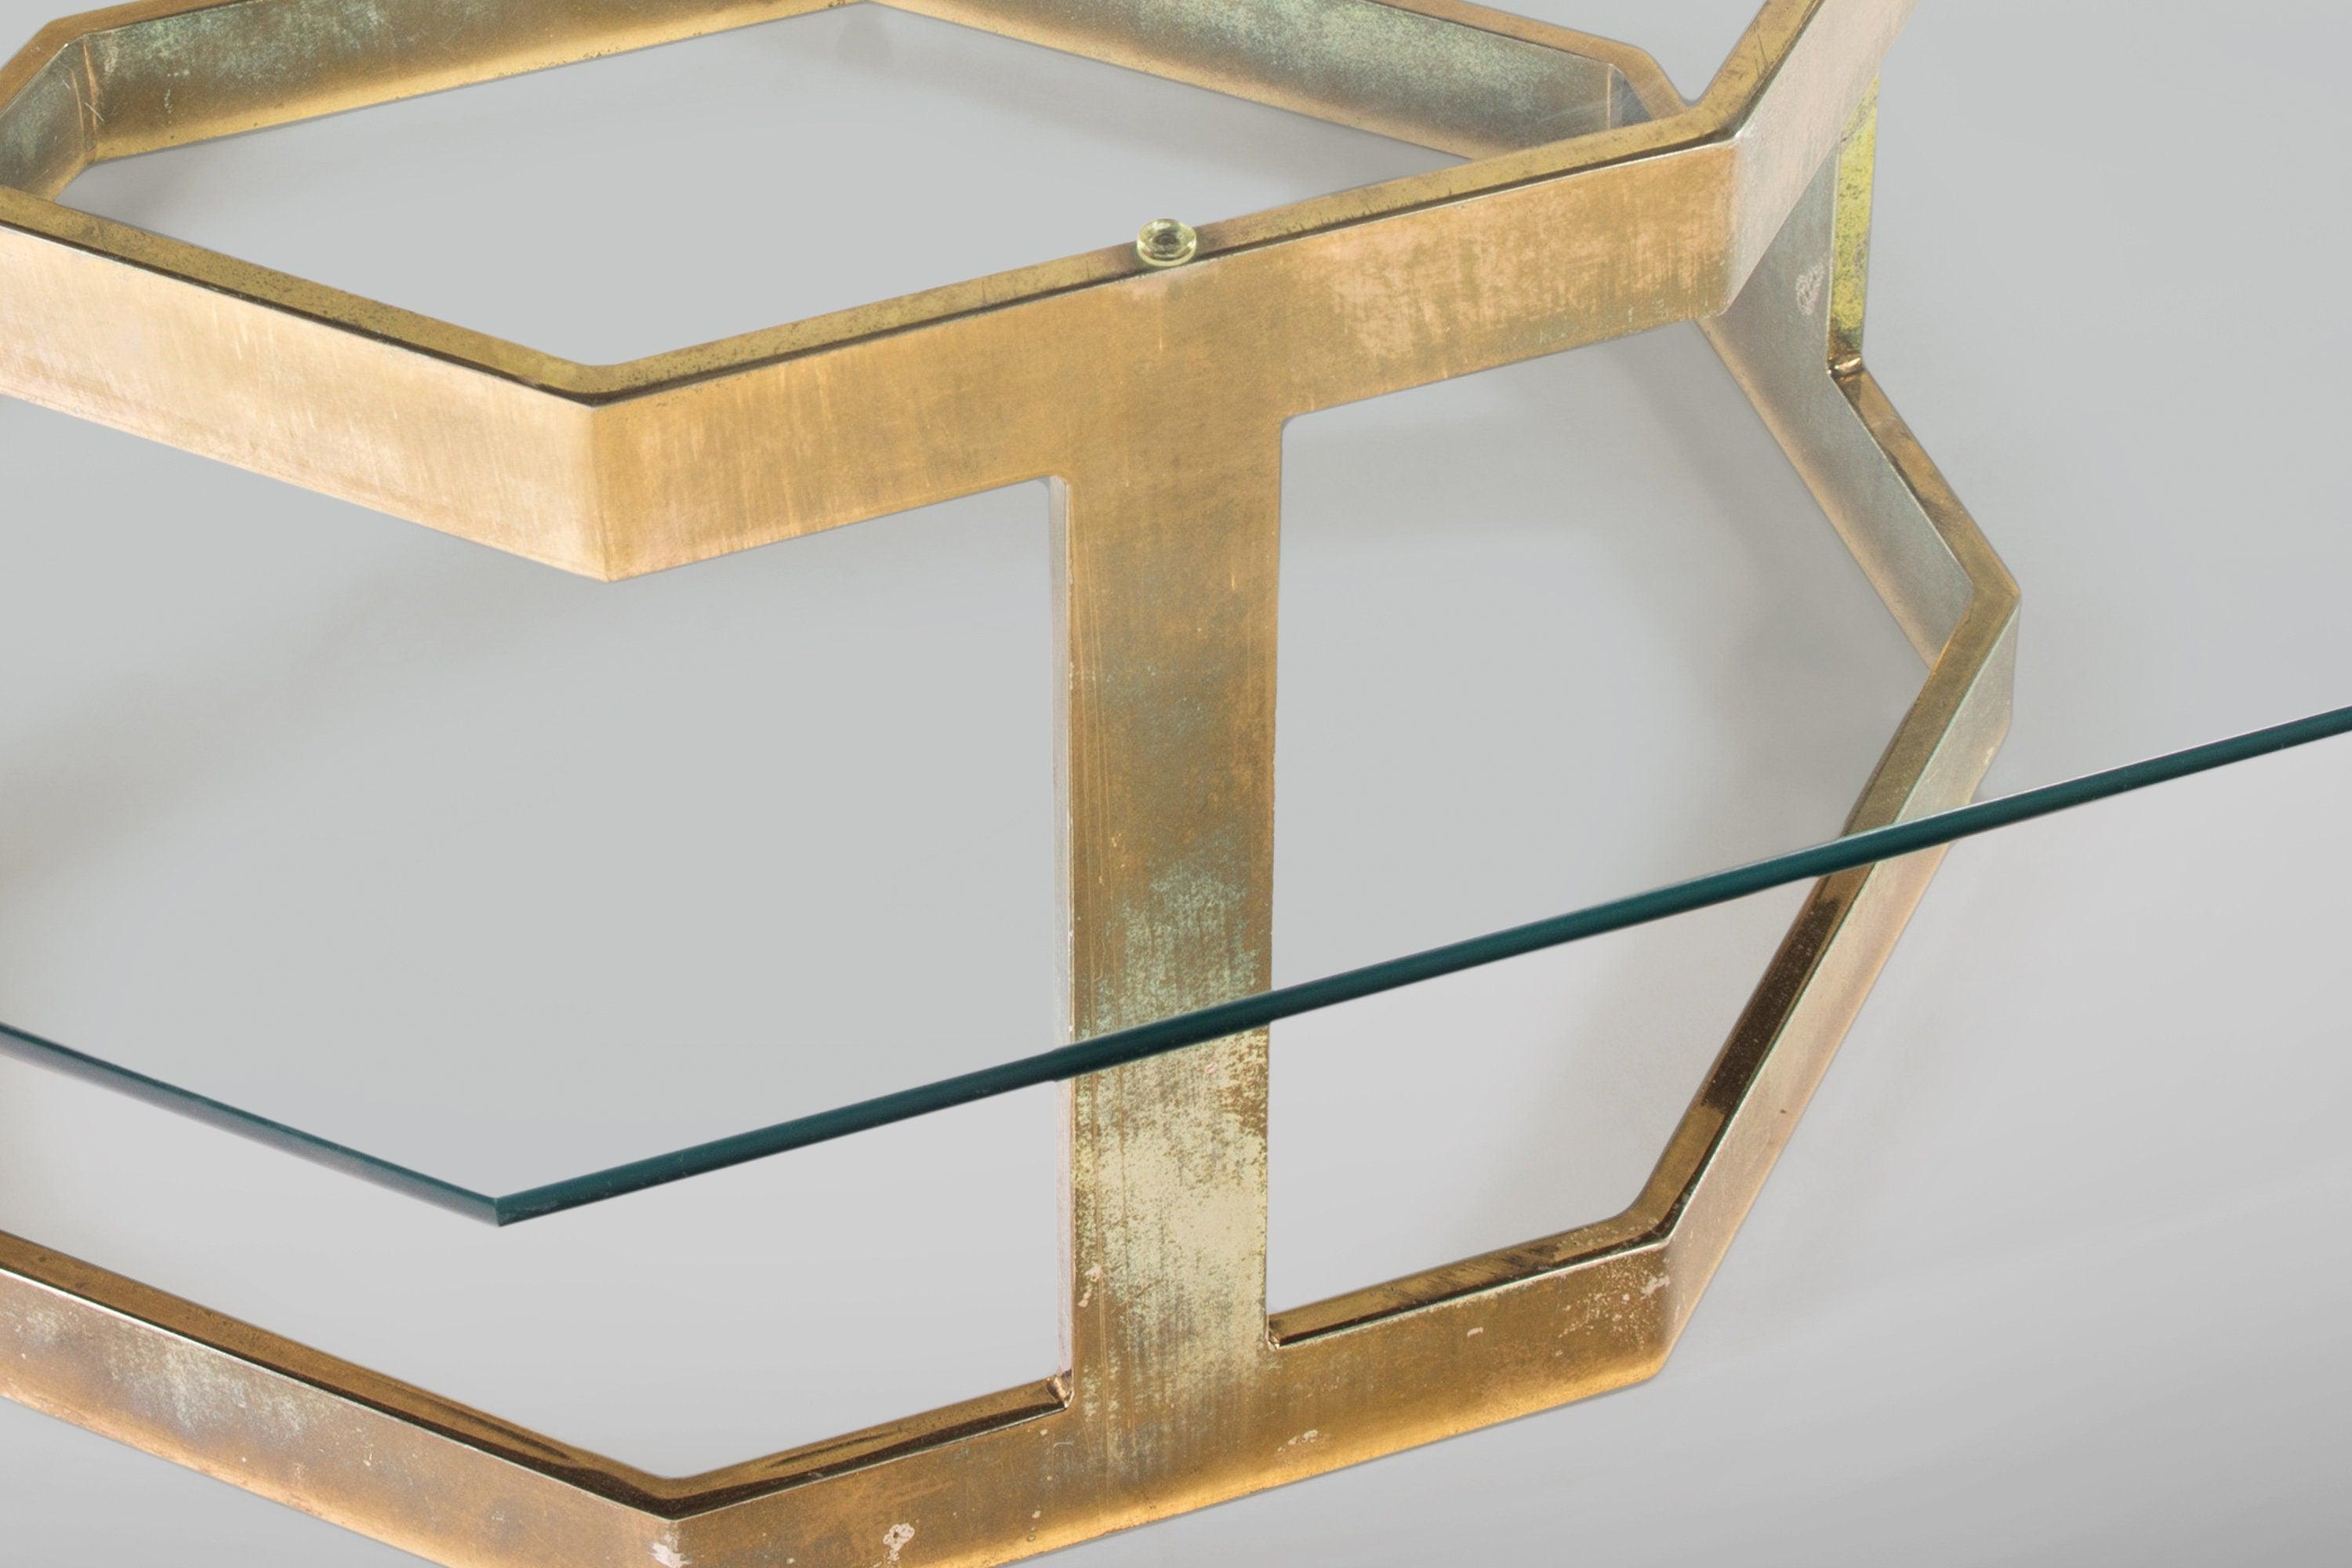 Patinaed Brass Octagonal Coffee / Cocktail Table After Milo Baughman, c. 1970s For Sale 1